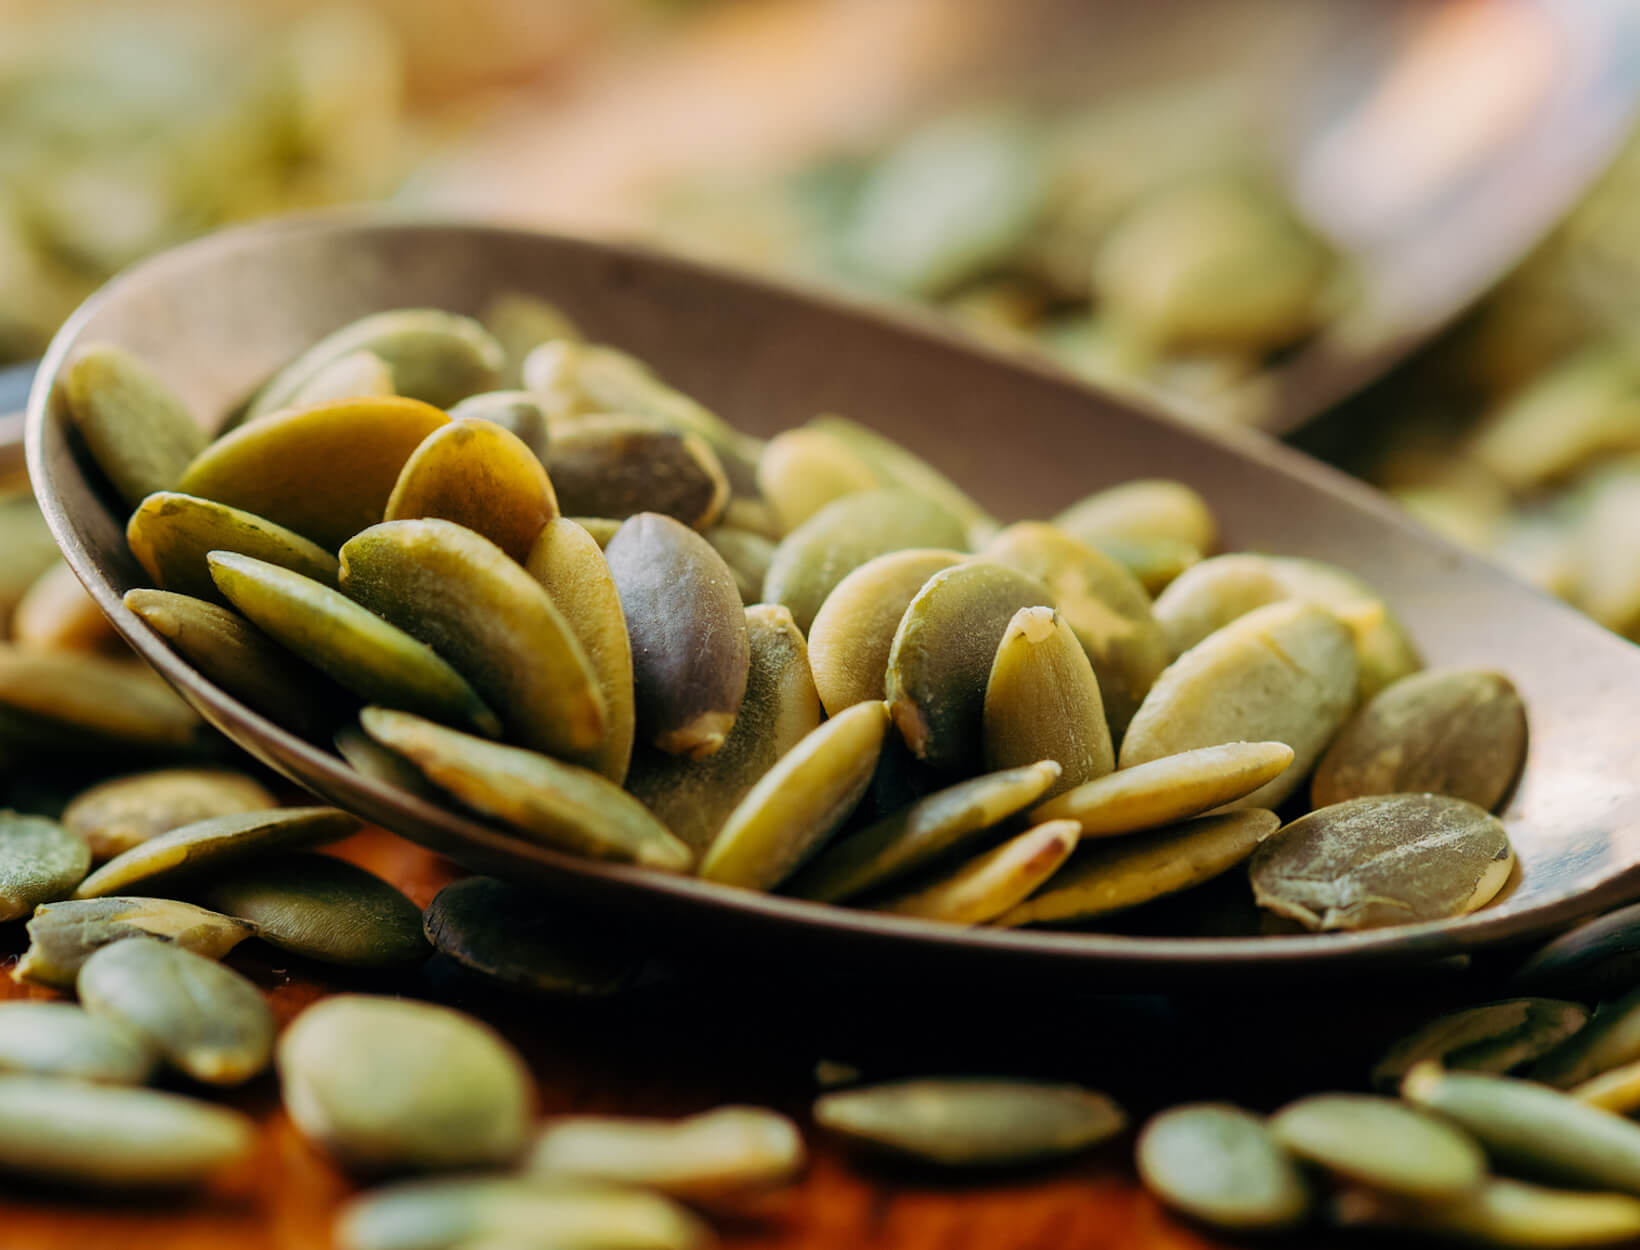 Can Seed Cycling Carry Your Hormones into Equilibrium?